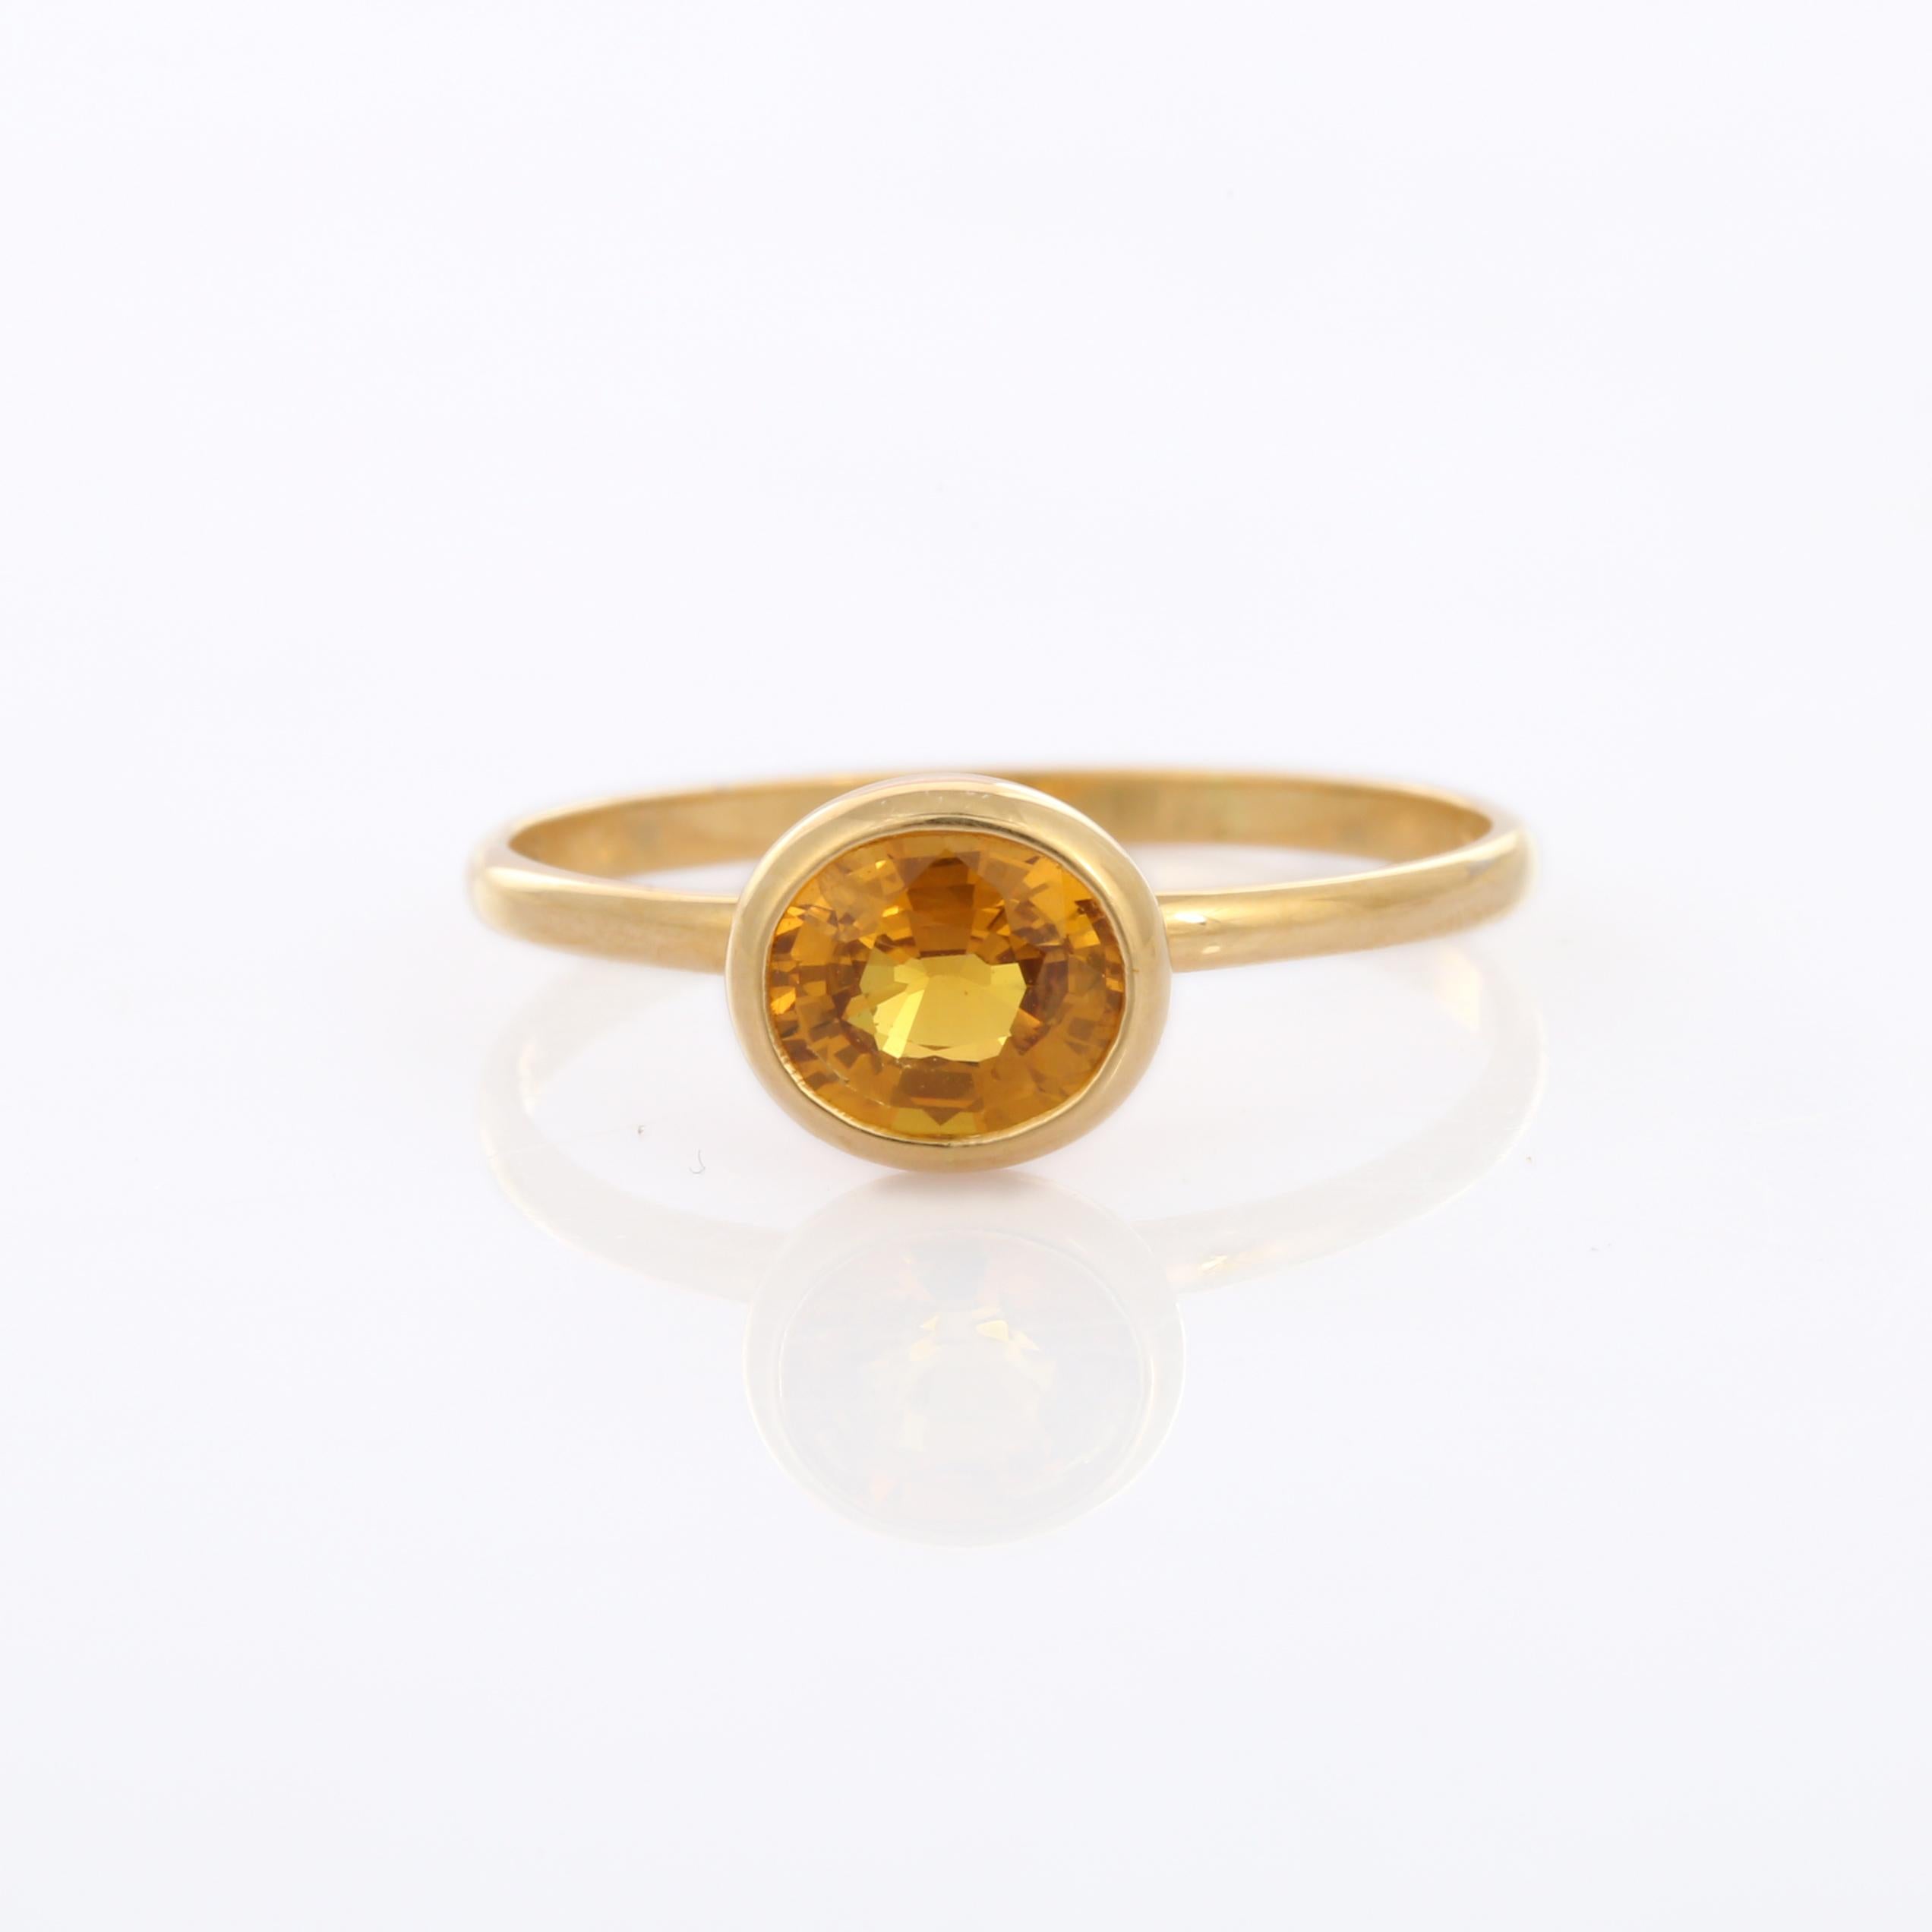 For Sale:  1.05 Carat Yellow Sapphire Solitaire Ring in 18K Yellow Gold 7